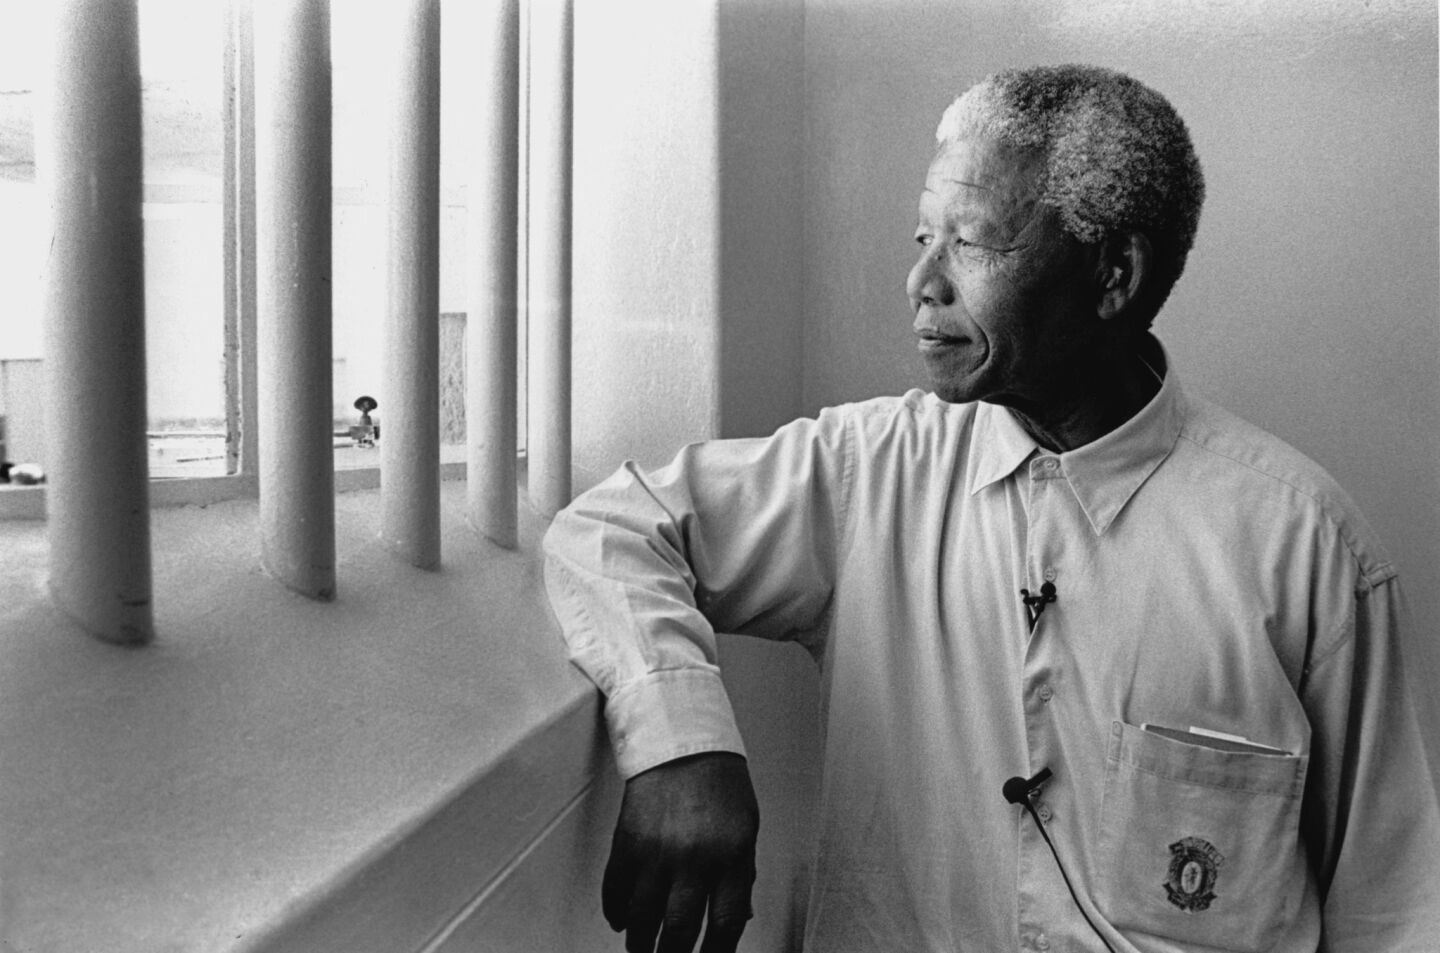 Jailed for 27 years by a white-minority government as a terrorist, he walked free as a septuagenarian to lead South Africa to its first multiracial democracy. He was 95.